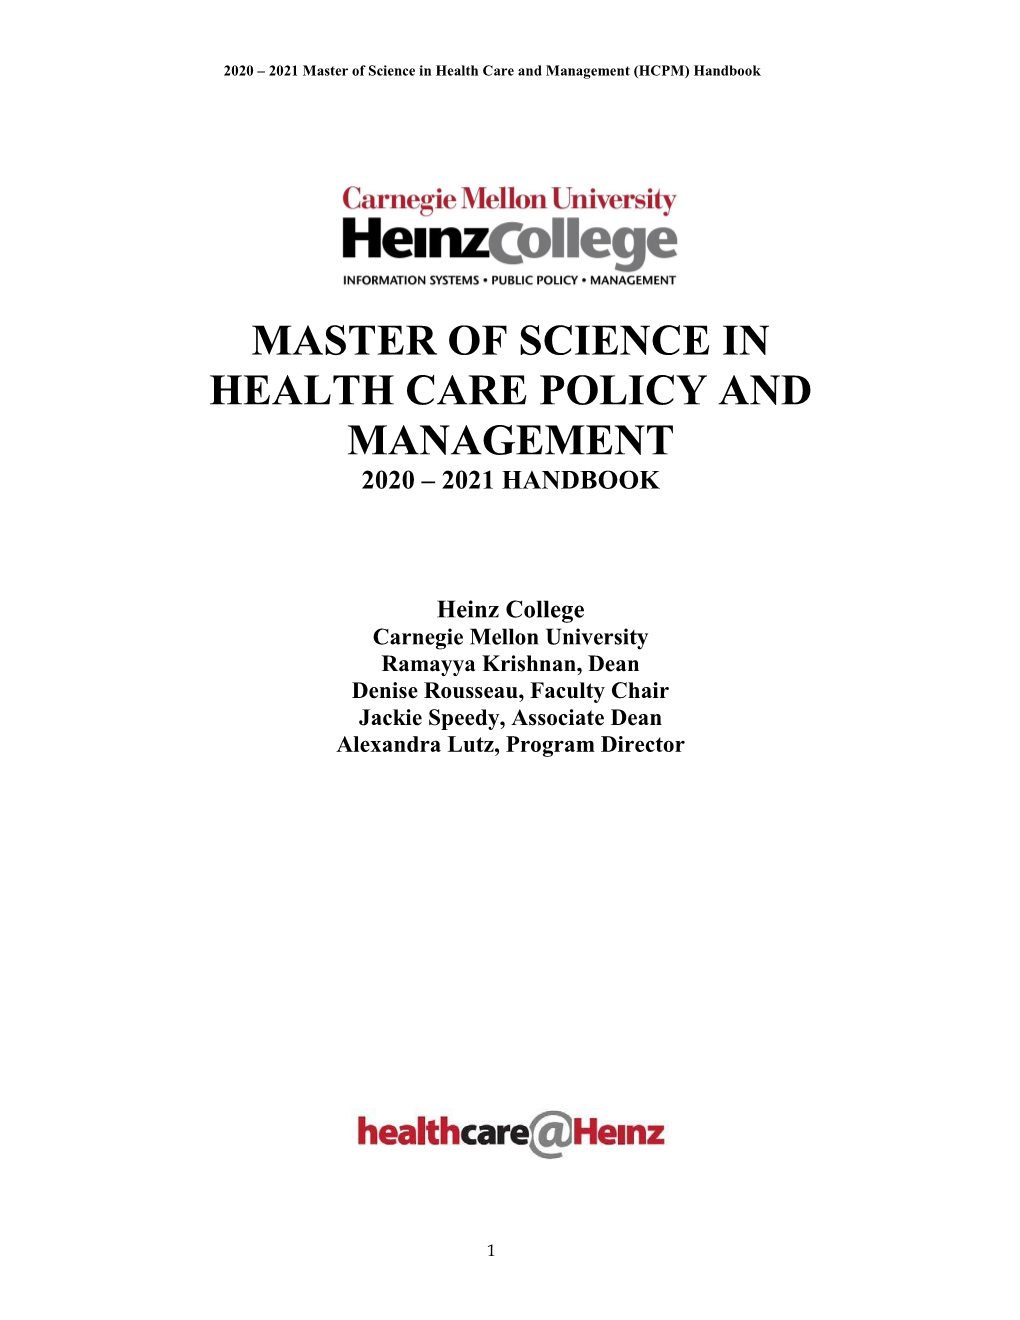 Master of Science in Health Care Policy and Management 2020 – 2021 Handbook